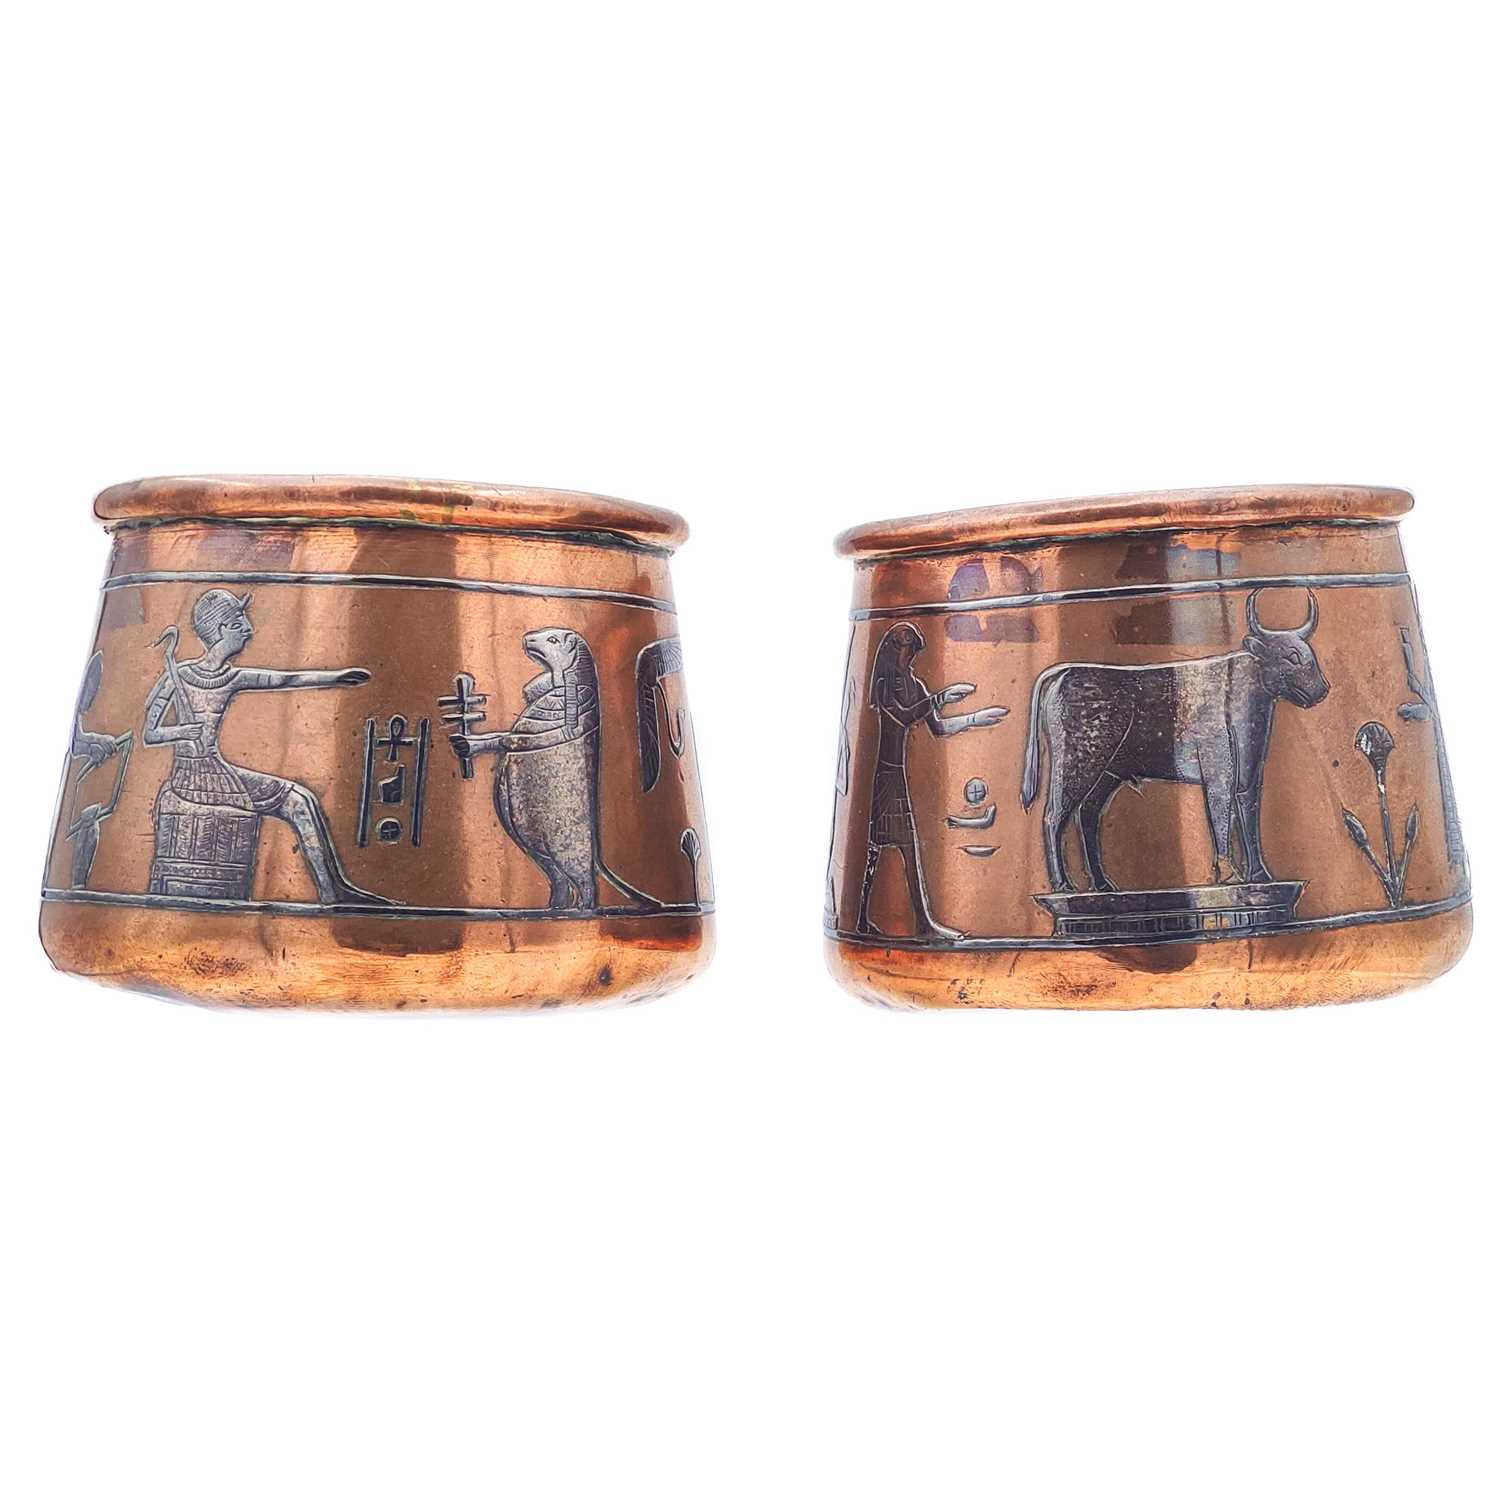 Lot 22 - A pair of Cairoware copper and inlaid silver bowls, circa 1900.